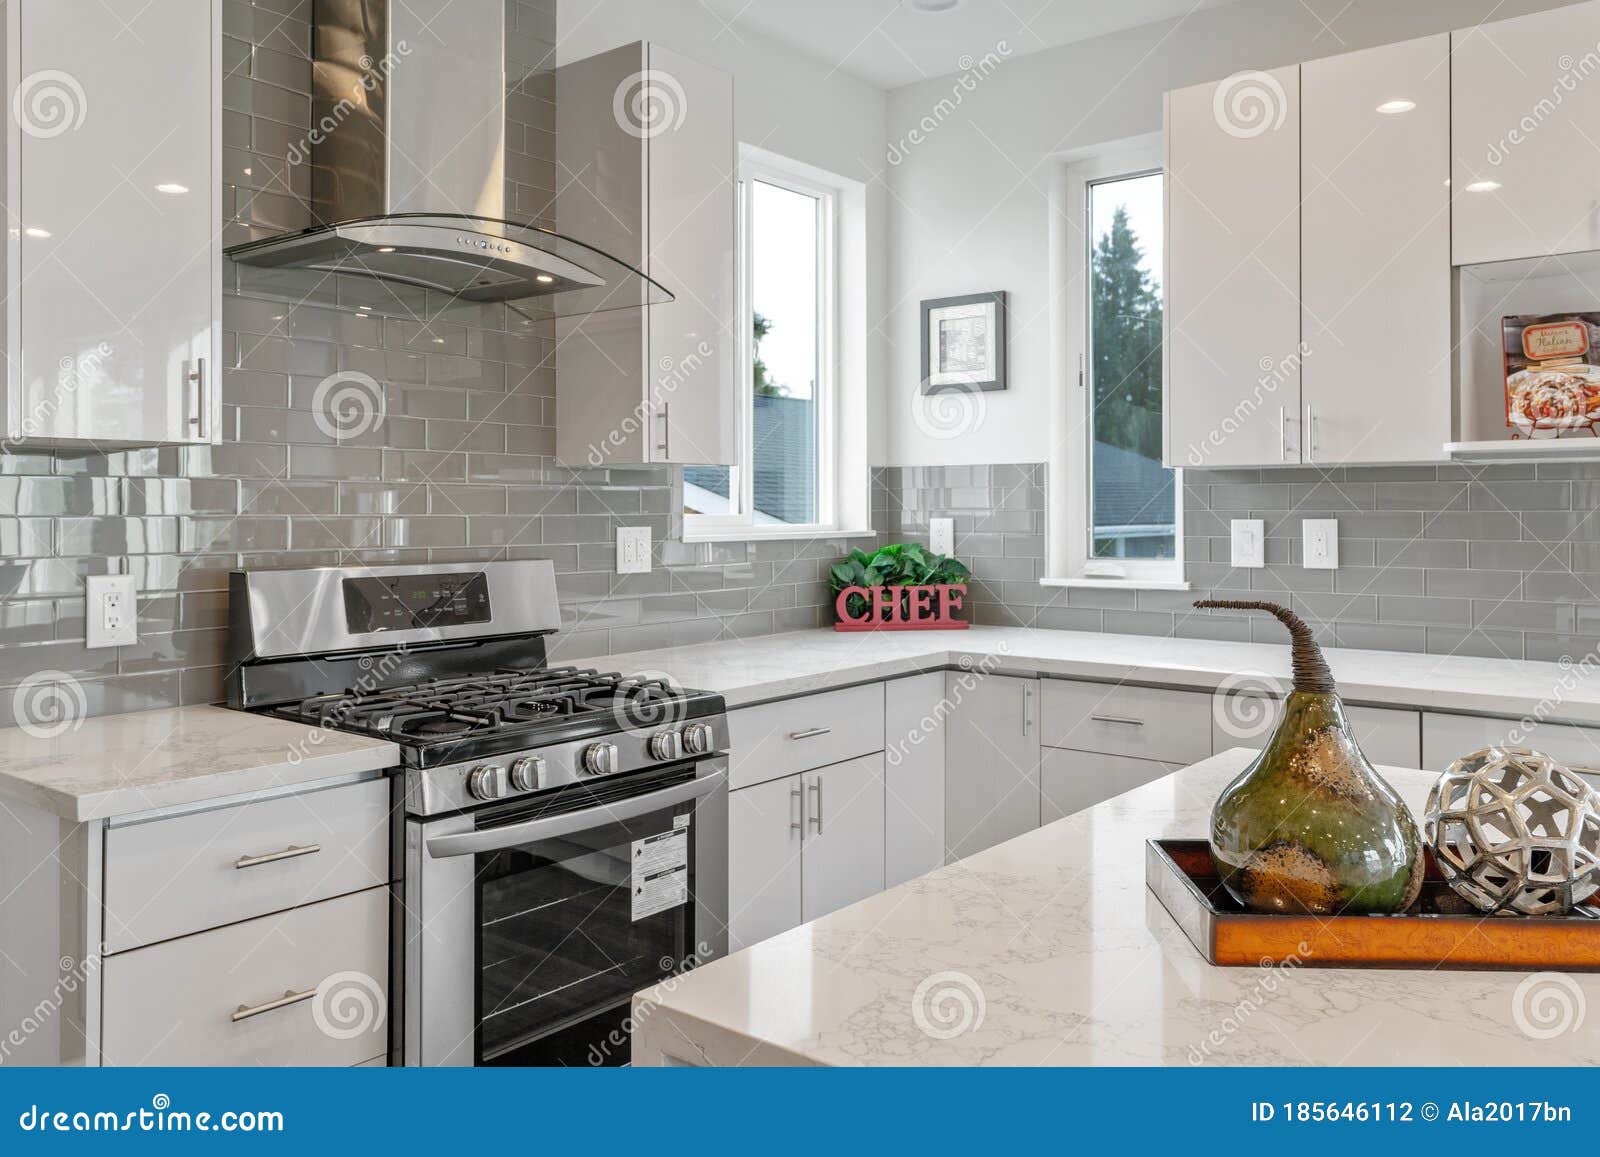 861 Subway Tile Kitchen Photos Free Royalty Free Stock Photos From Dreamstime